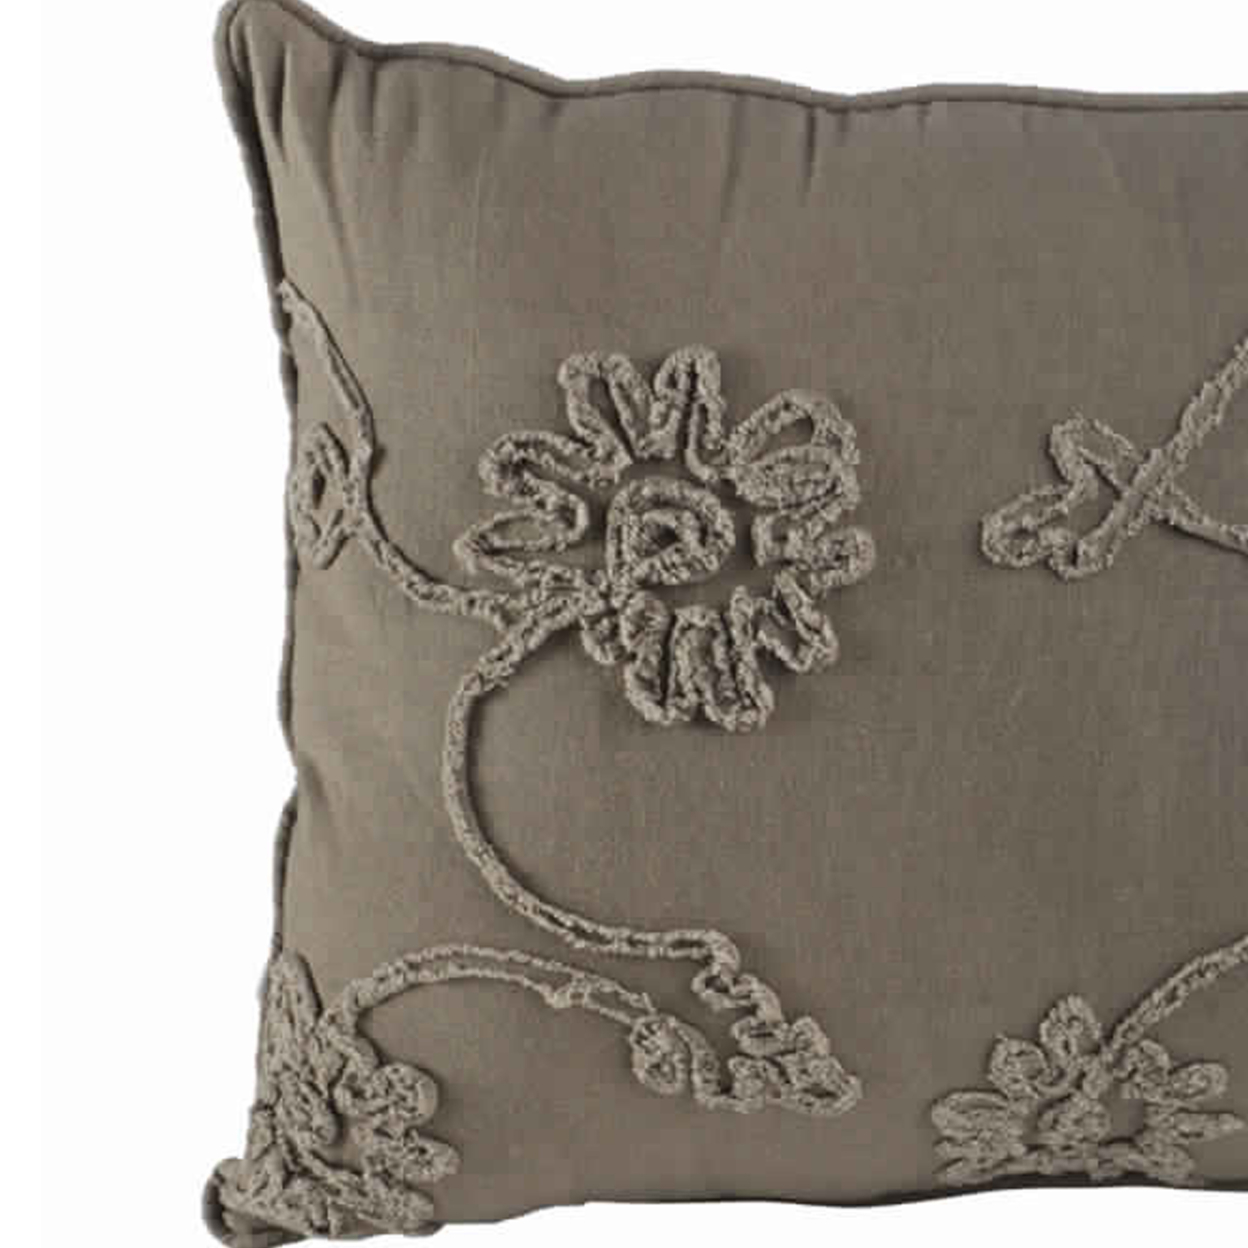 25 X 15.5 Inch Decorative Cotton Pillow With Floral Embroidery, Set Of 2, Gray- Saltoro Sherpi